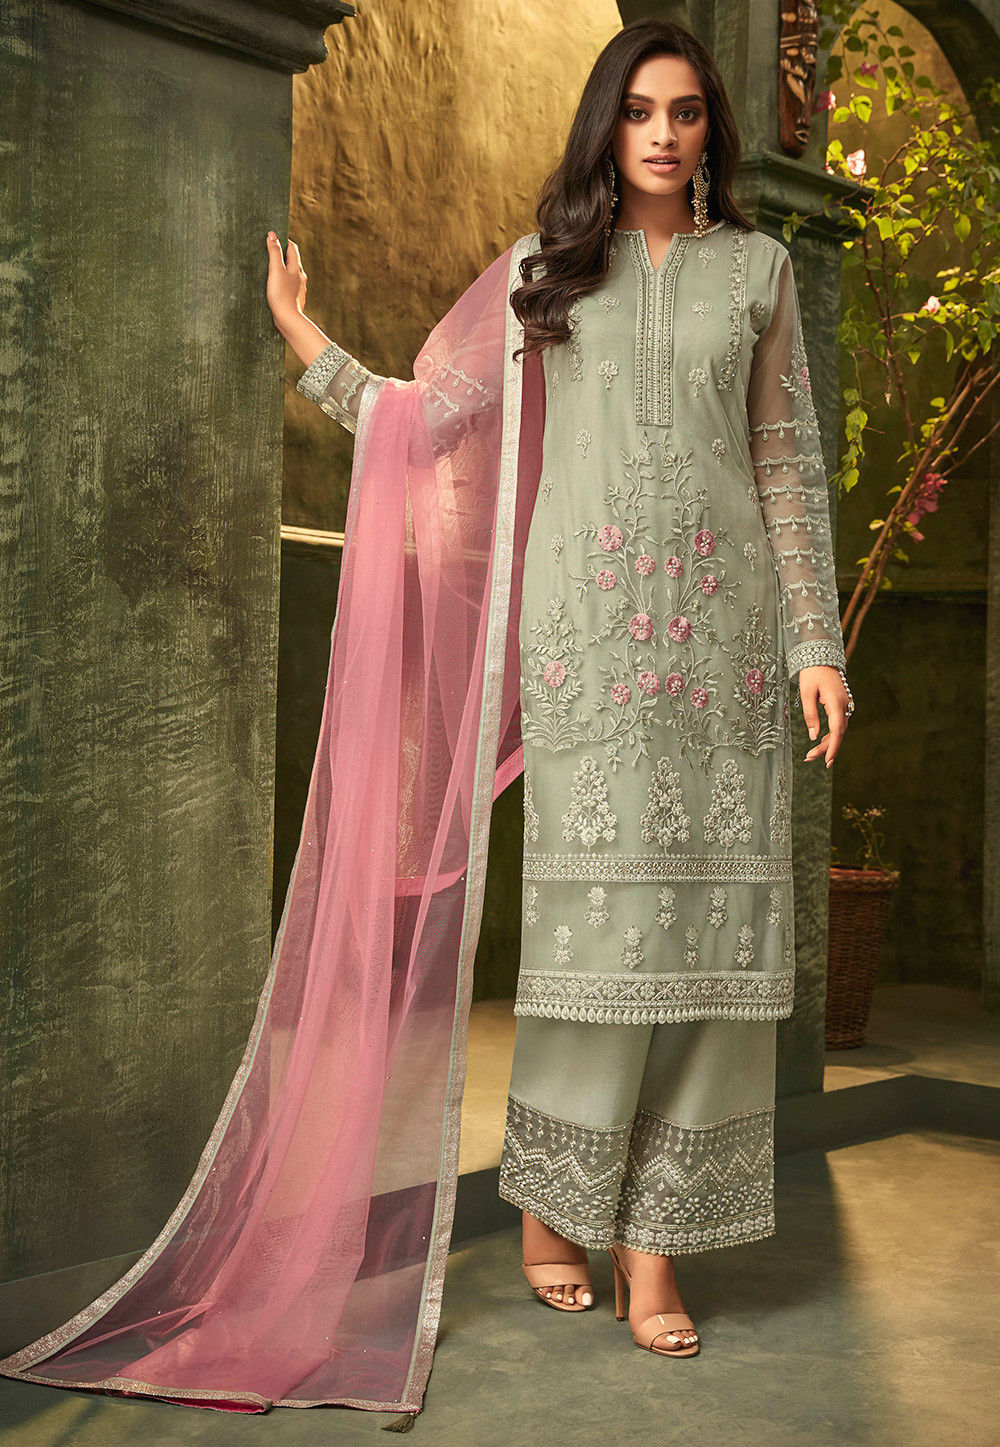 ALIF FASHION A 71 PAKISTANI SUITS IN INDIA